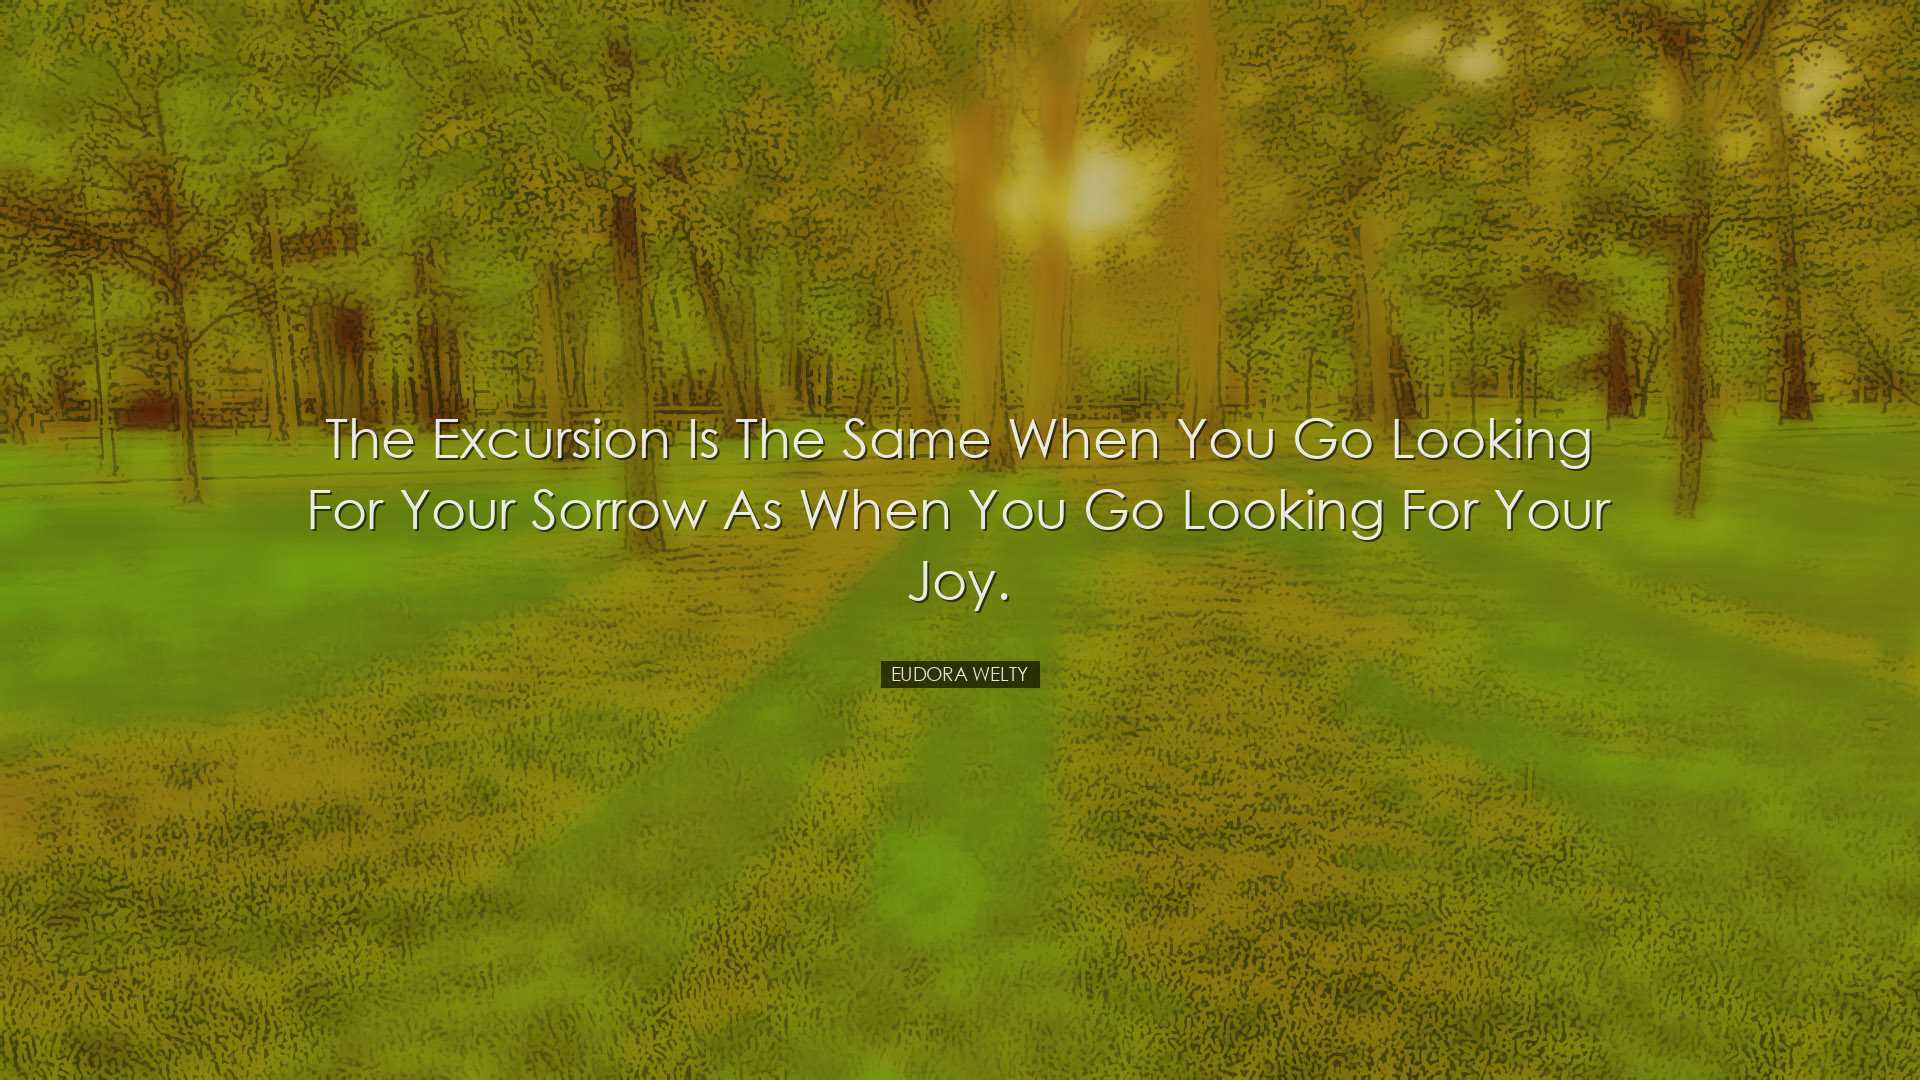 The excursion is the same when you go looking for your sorrow as w